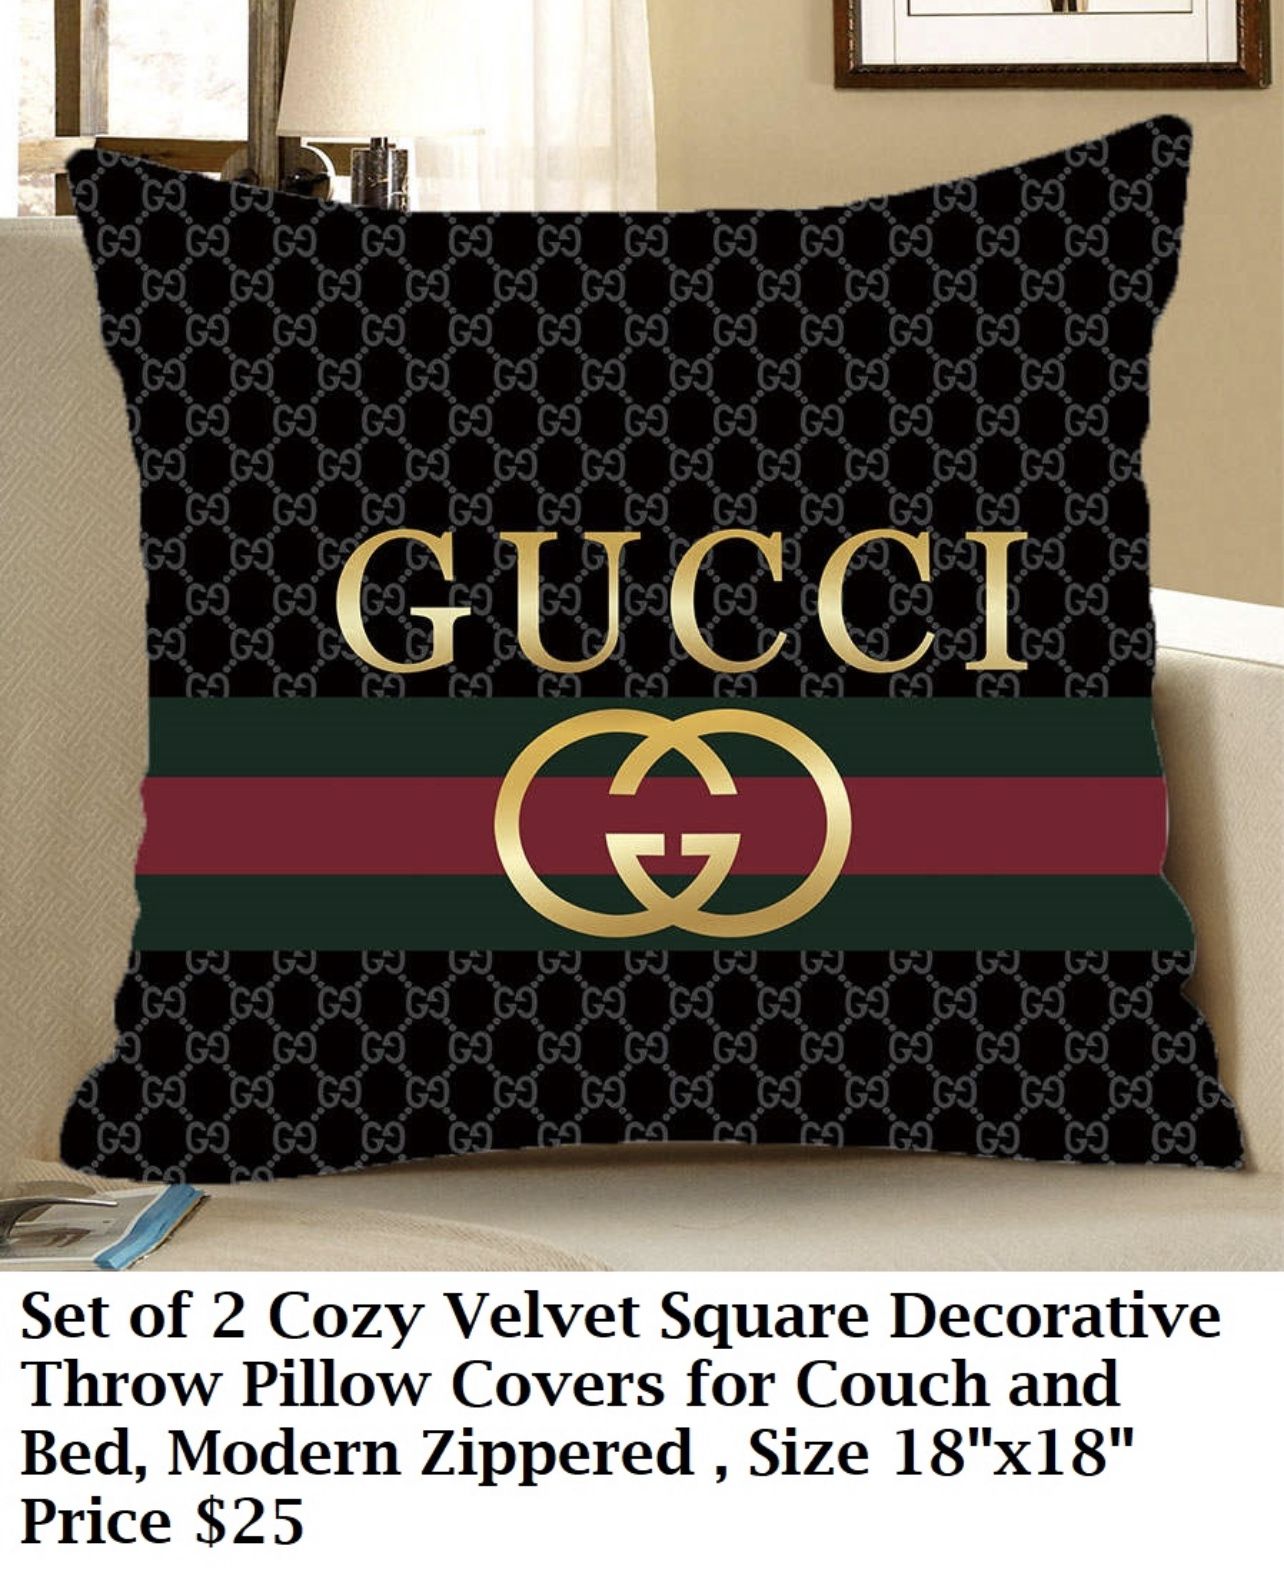 2 Pieces of Cozy Velvet Square Decorative Throw Pillow Covers Double face, Modern  Zippered. Size 18”x18” Price $25 for Sale in Orlando, FL - OfferUp